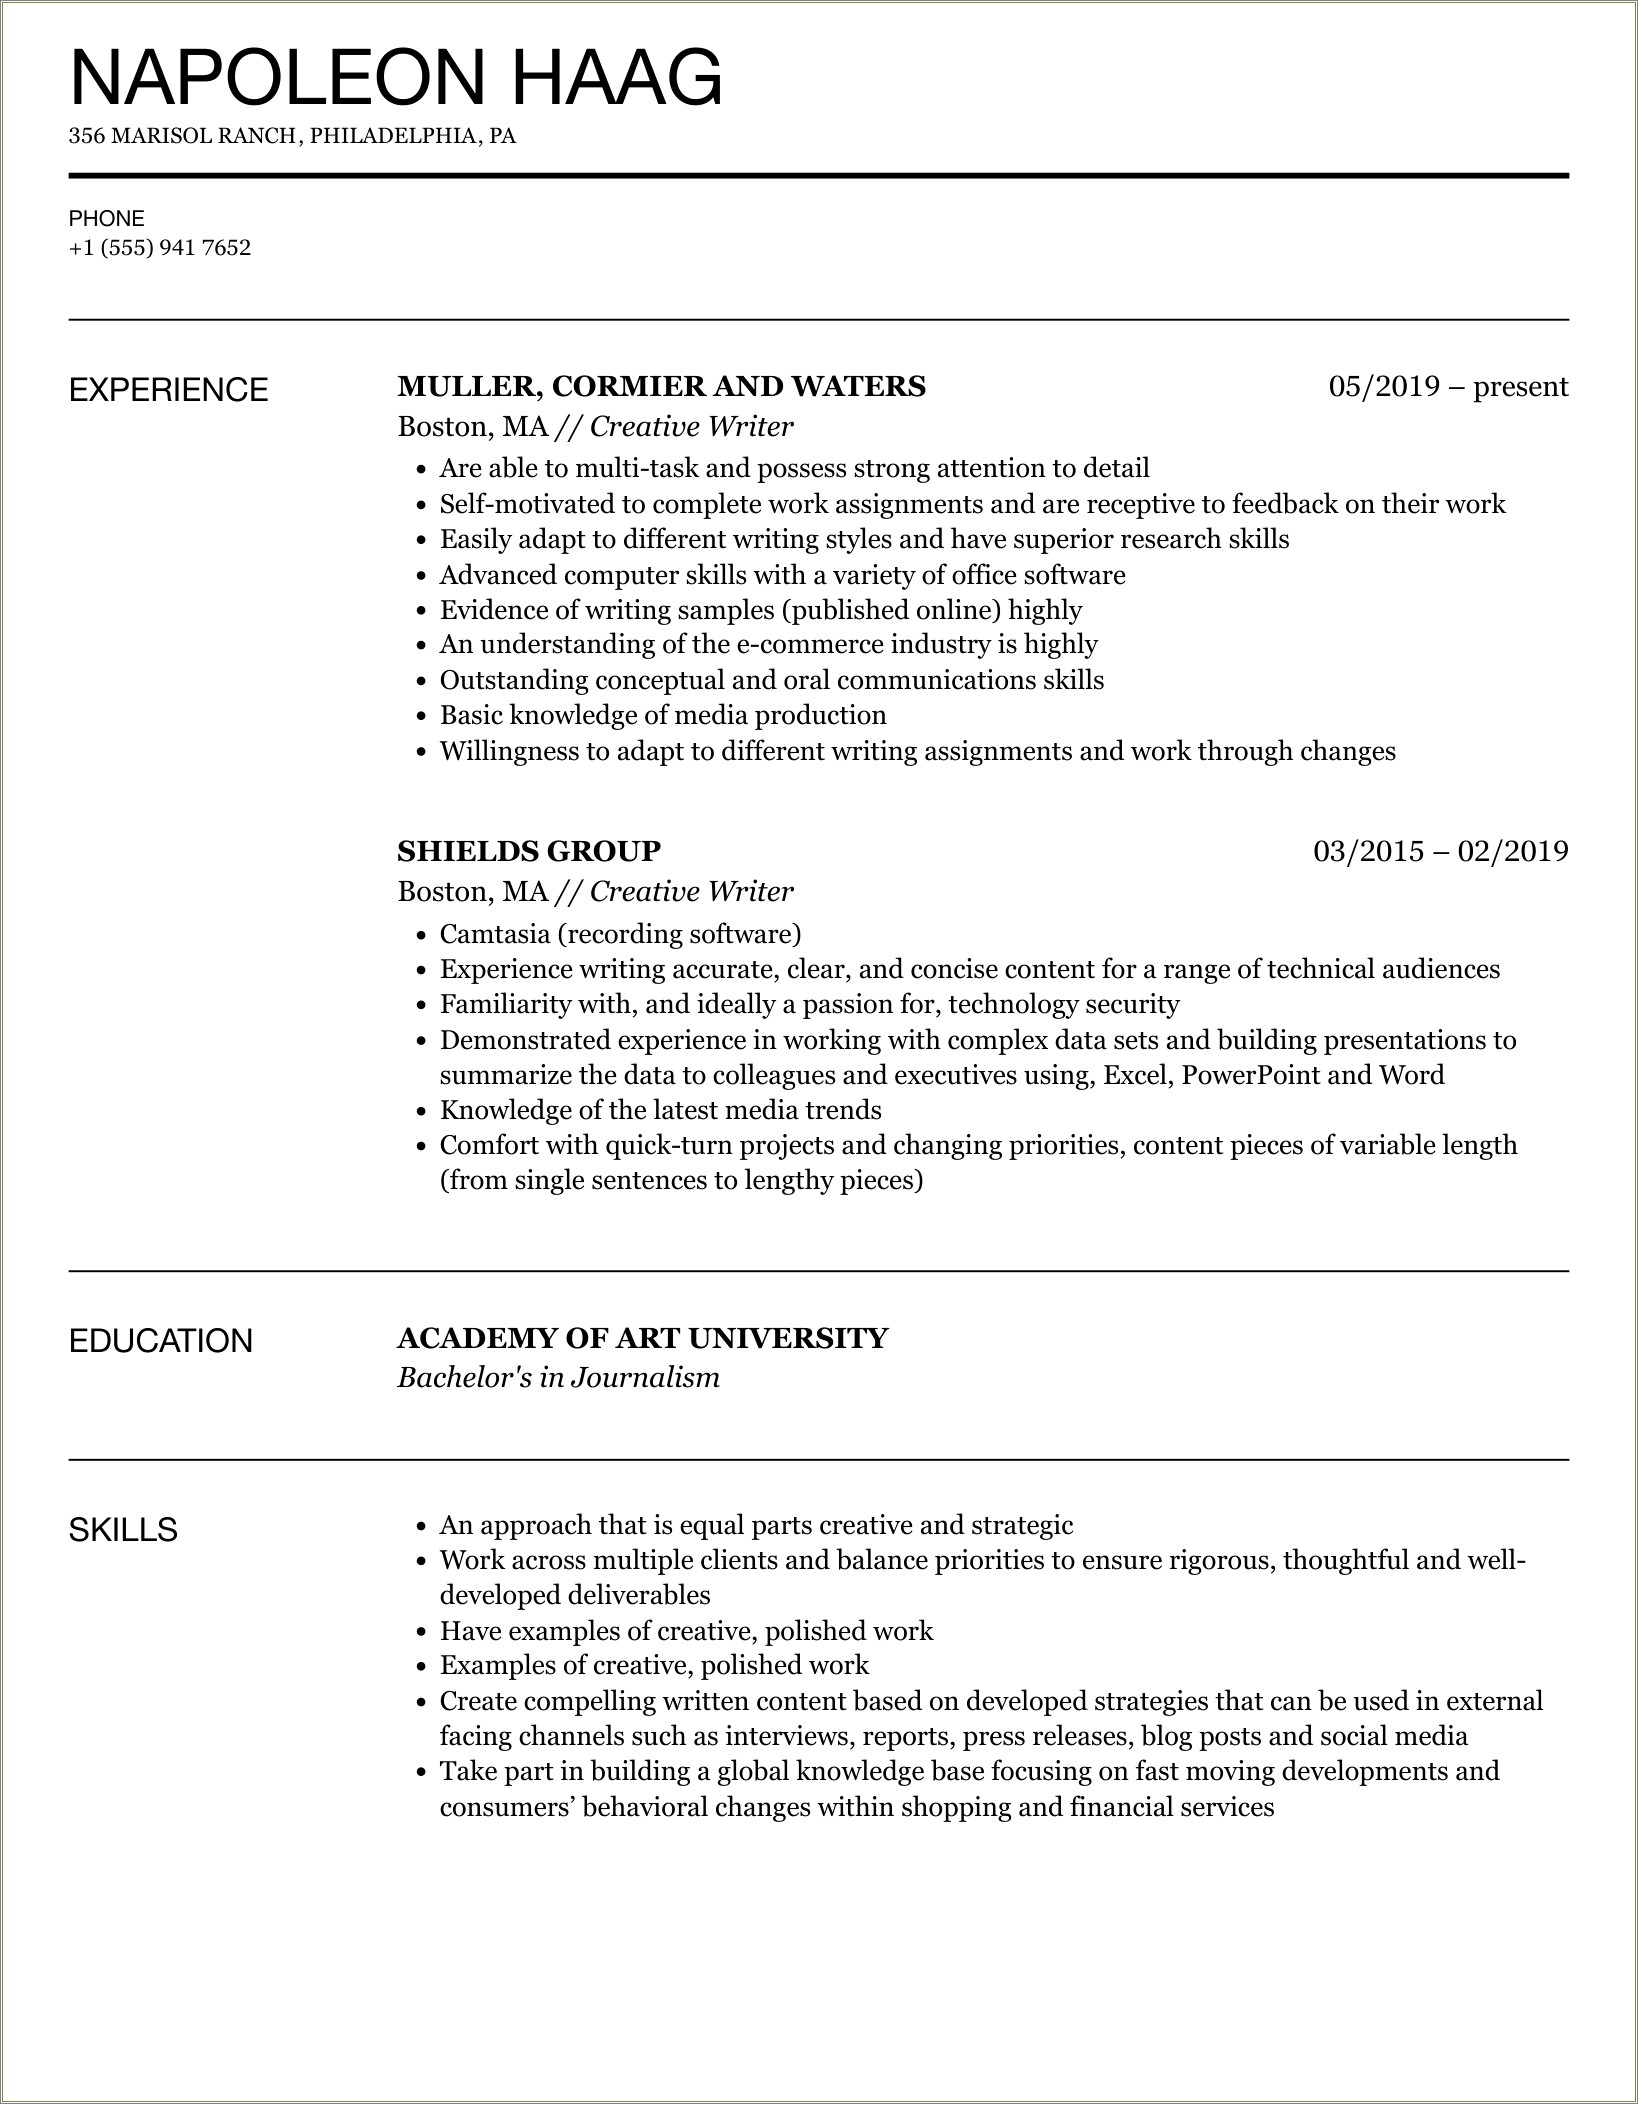 Resume Skills Other Way To Say Creative